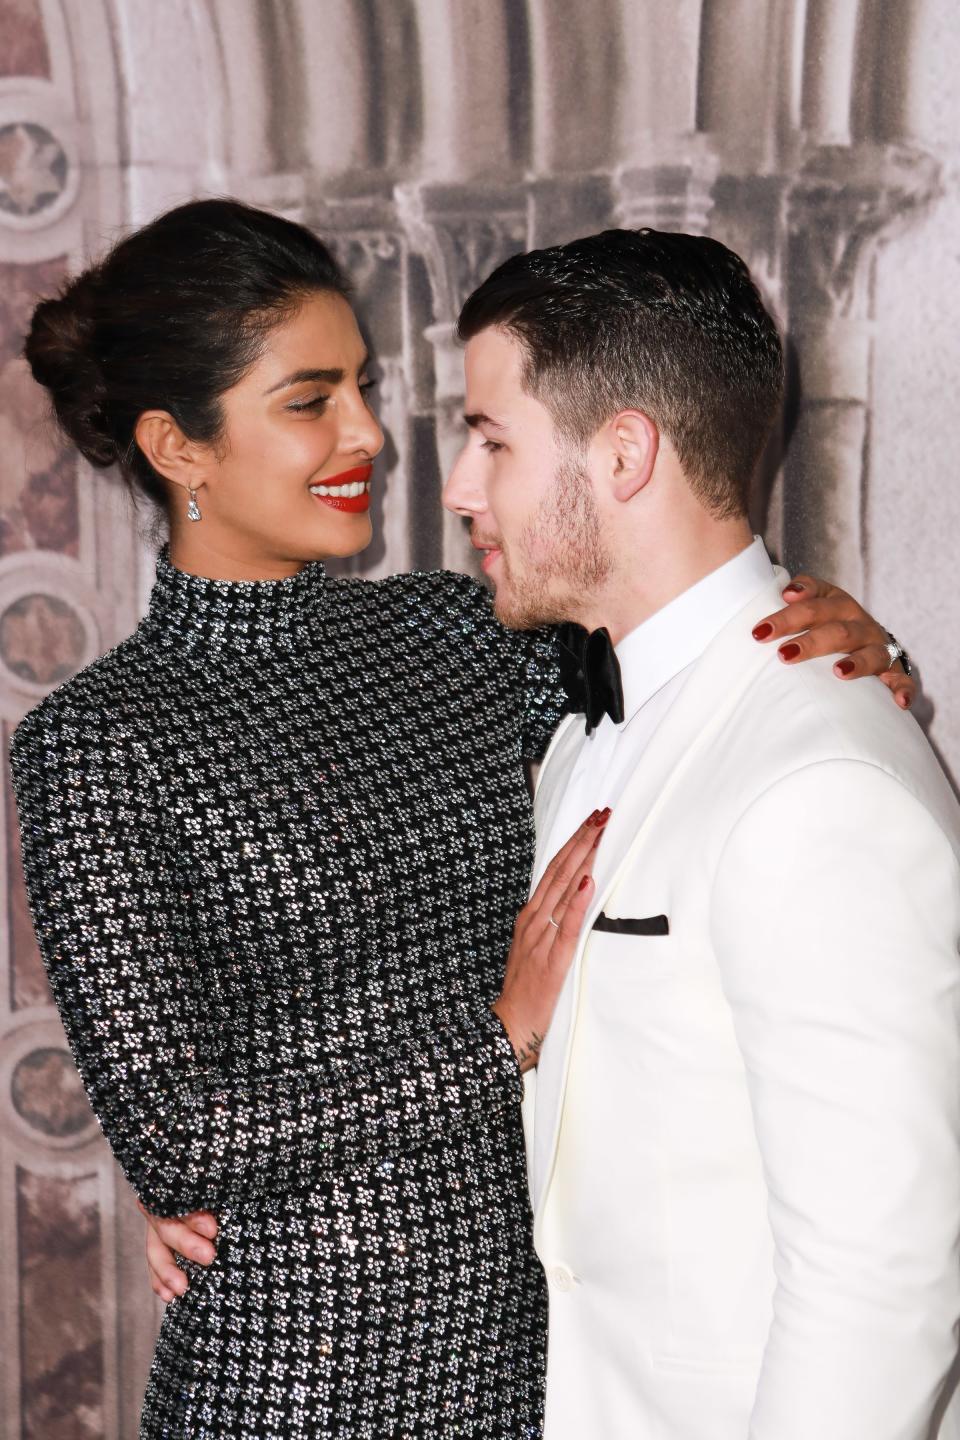 NEW YORK, NY - SEPTEMBER 07:  Priyanka Chopra and Nick Jonas during the Ralph Lauren 50th Anniversary - September 2018 - New York Fashion Week at Bethesda Terrace on September 7, 2018 in New York City.  (Photo by Gonzalo Marroquin/Patrick McMullan via Getty Images)